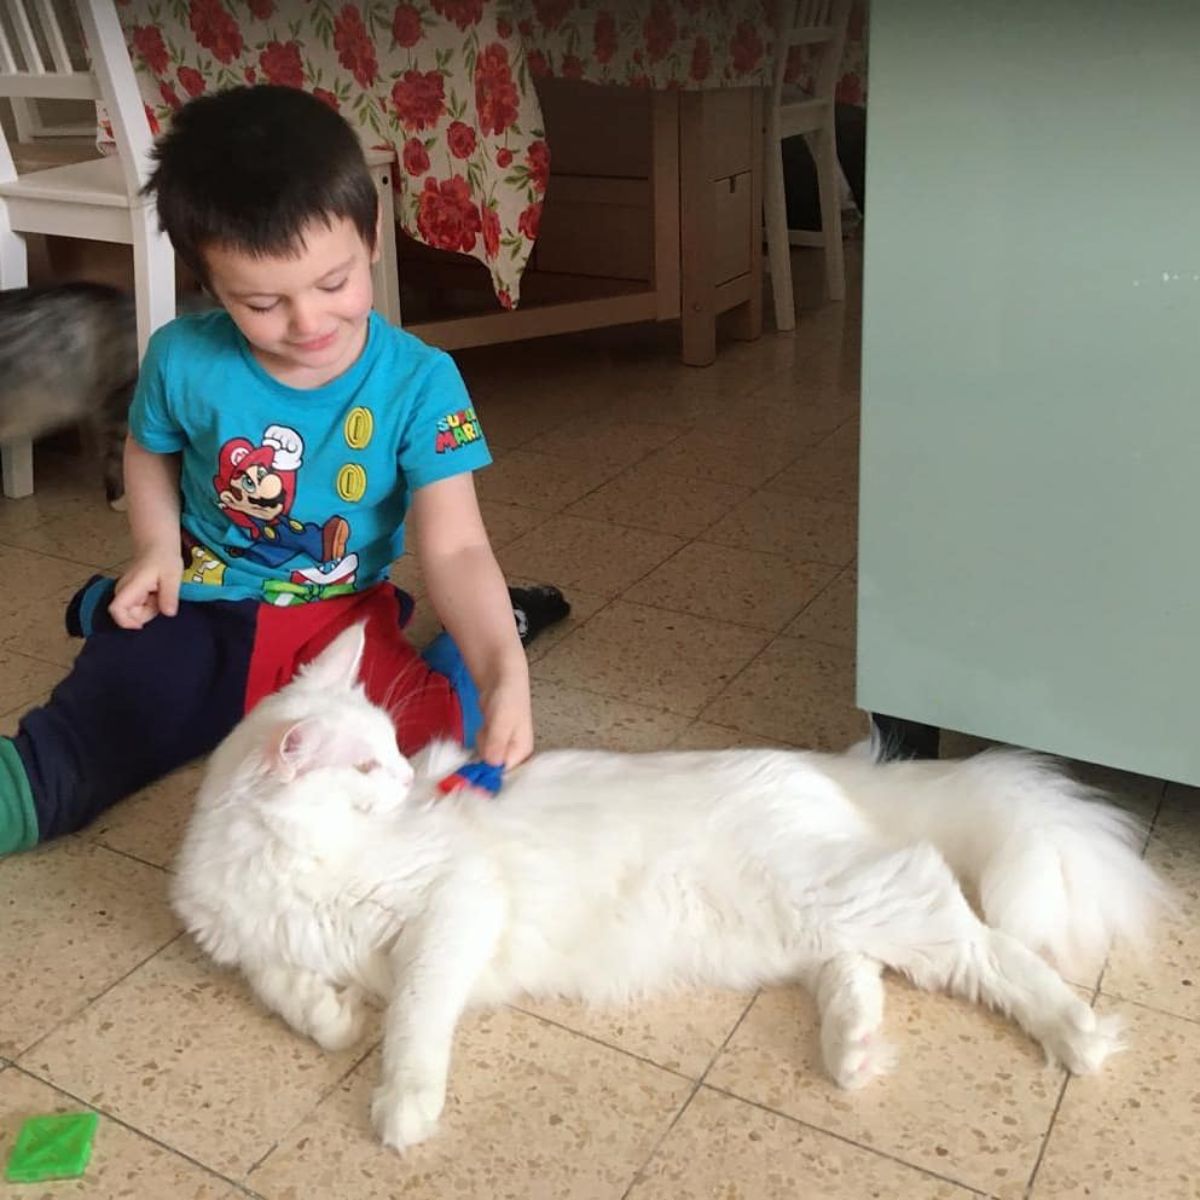 A young boy brushing a white maine coon on a floor.